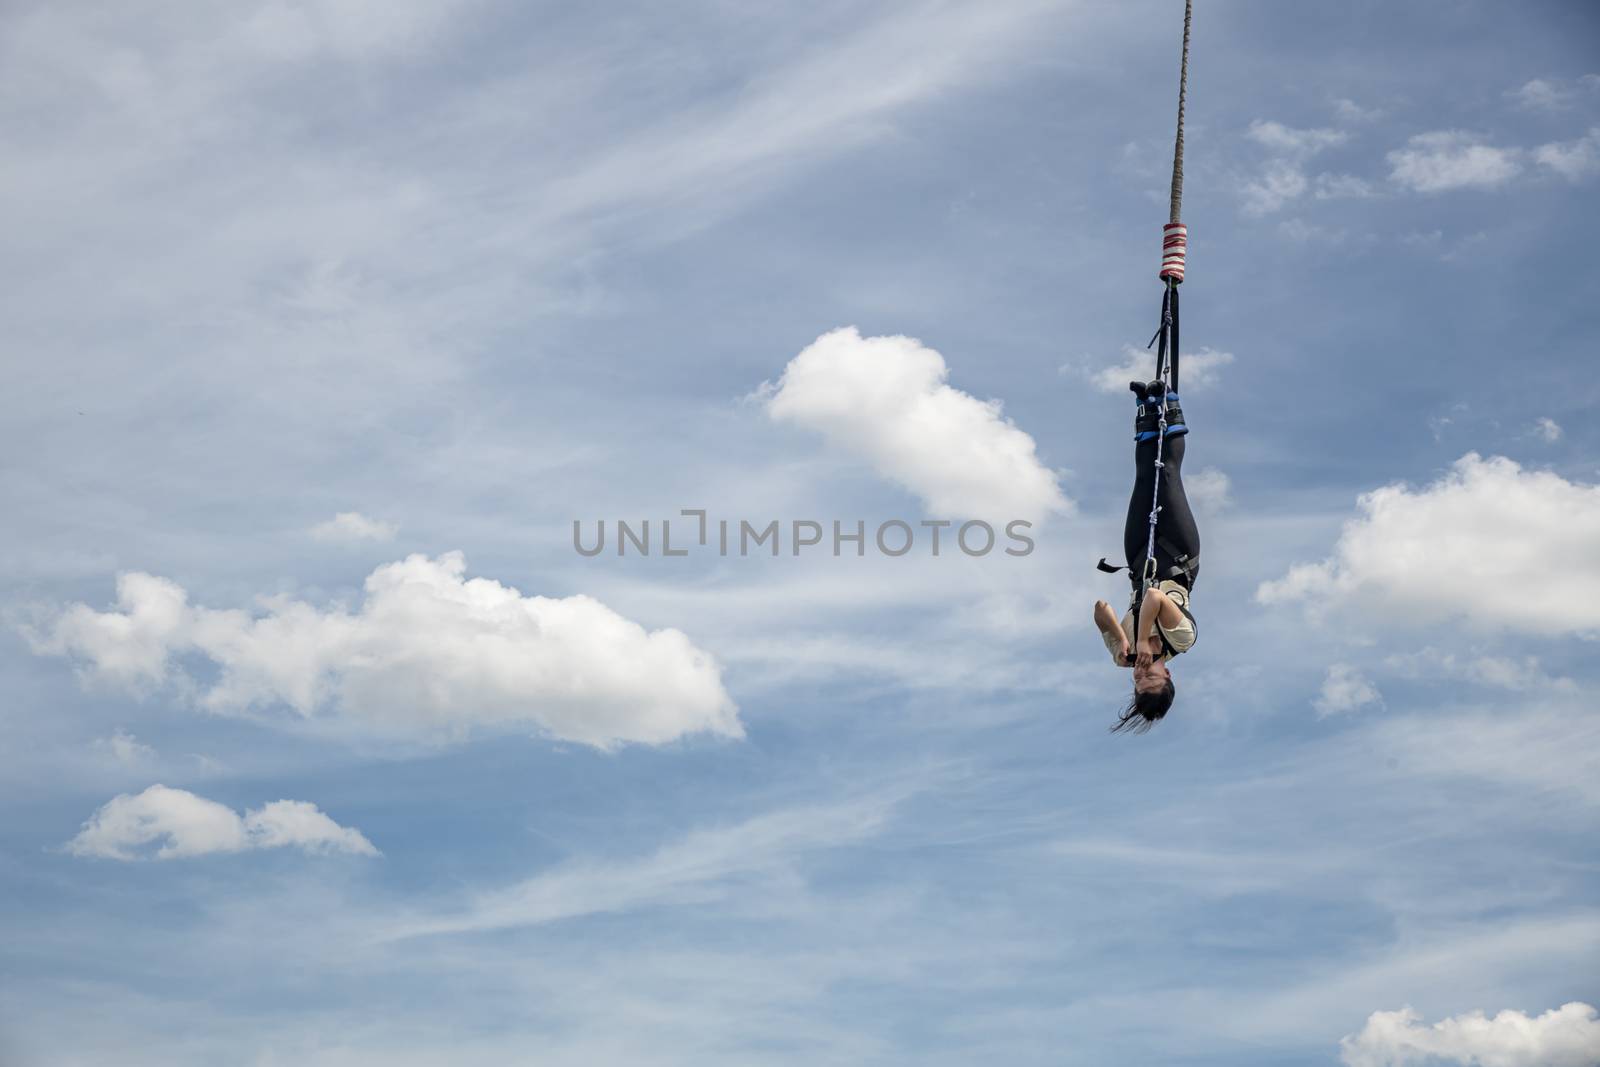 SCHEVENINGEN, 2 June 2019 - Bungee jumper jump from a platform hanging on the crane into the water against a pur blue spring sky of The Hague, Netherlands